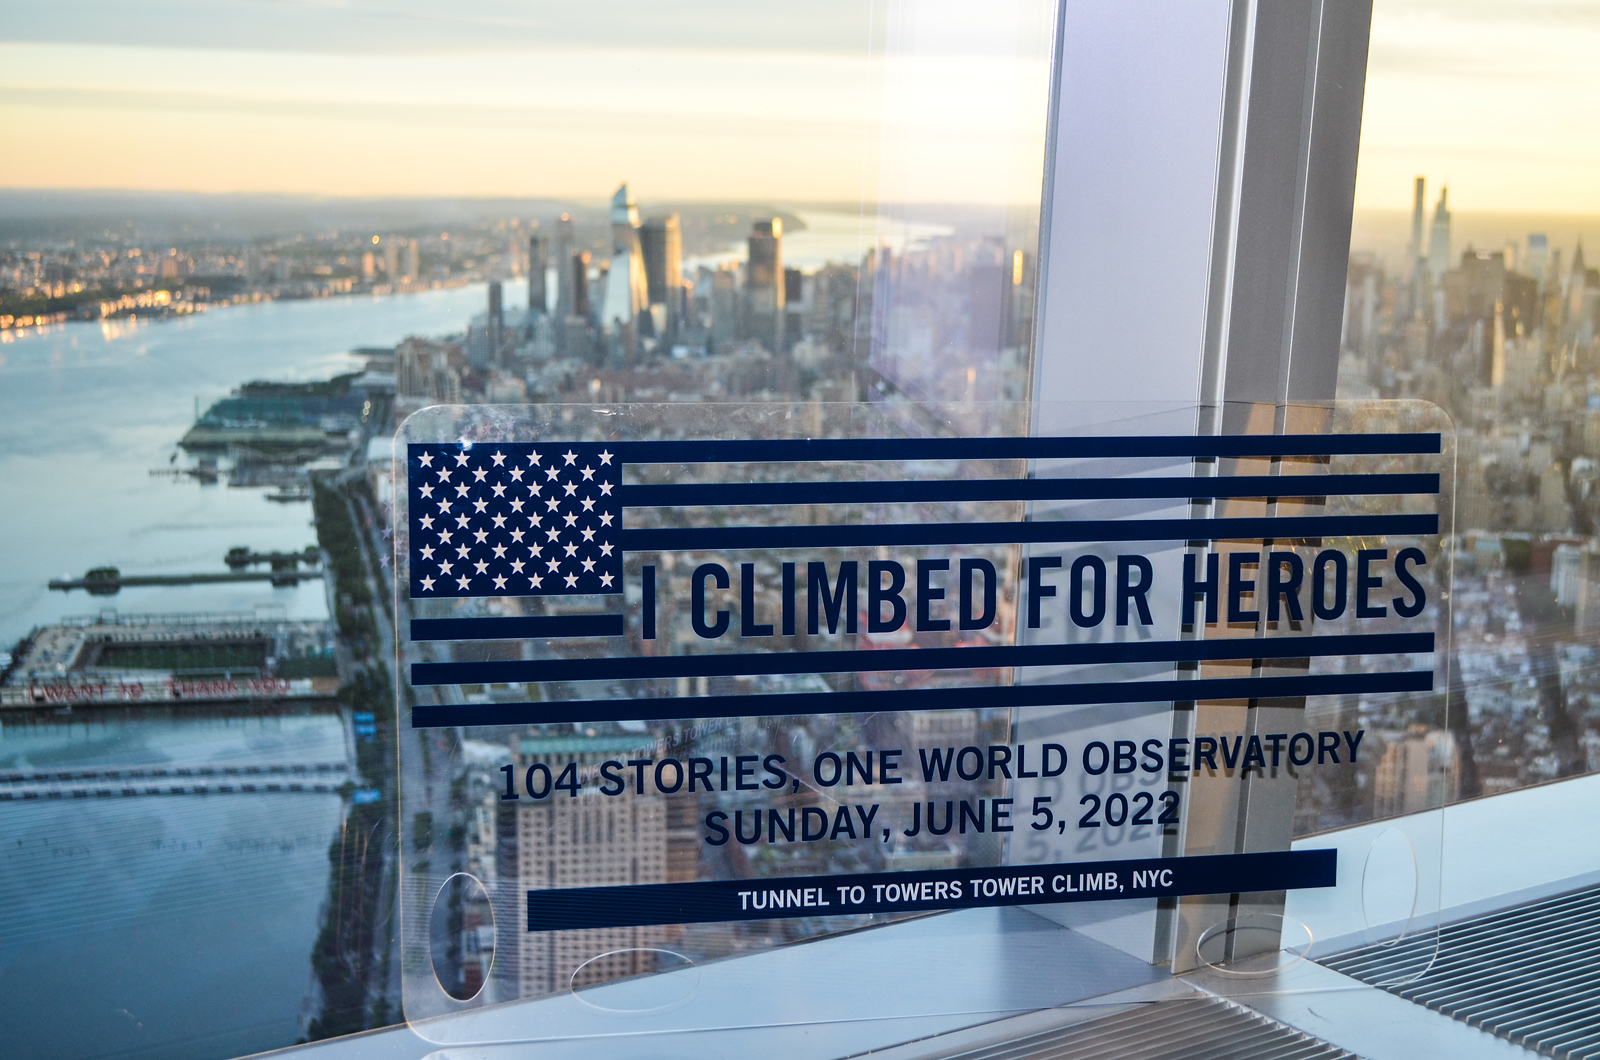 Registration Opens For the 7th Annual Tunnel to Towers Tower Climb New York City